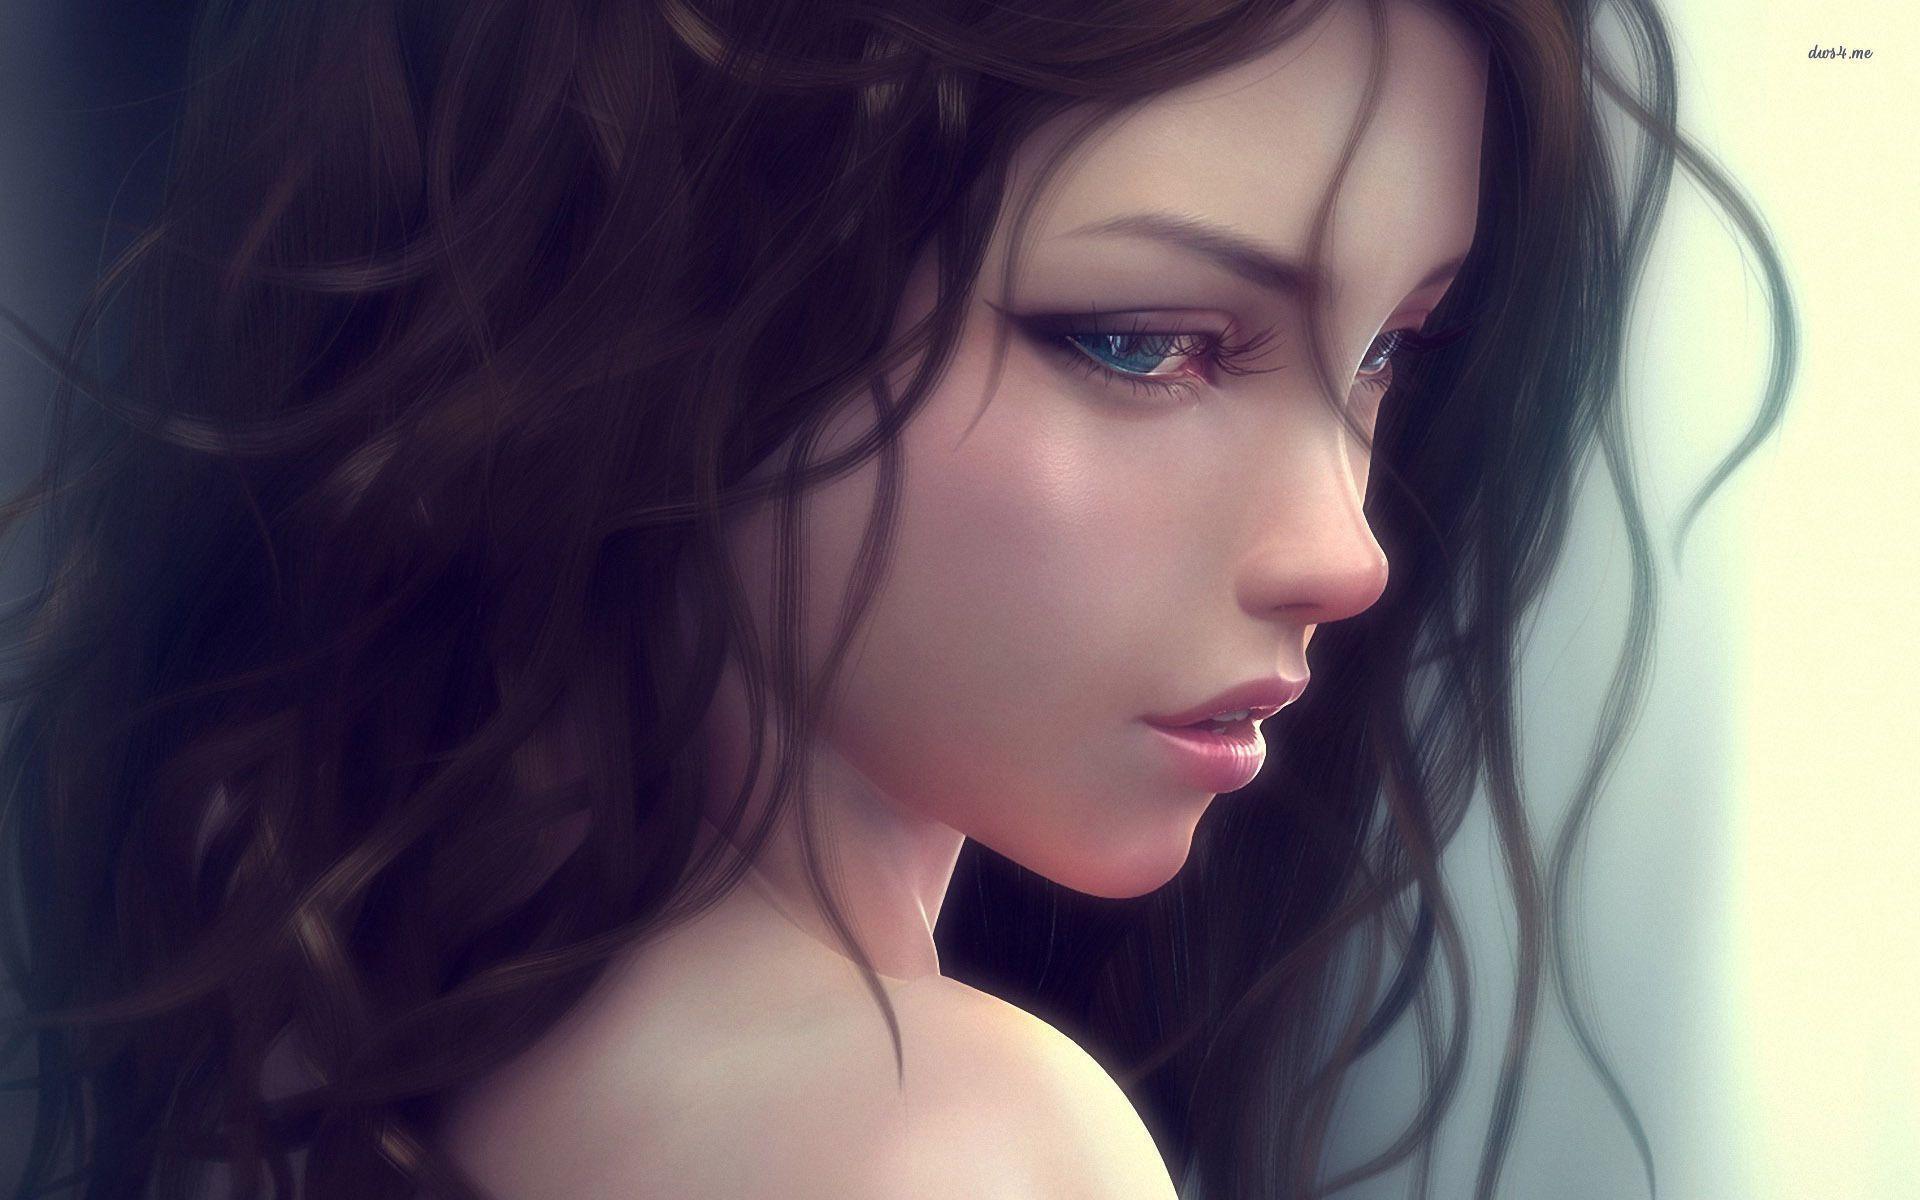 Beautiful Sad Girl Wallpaper Background, Image, Picture